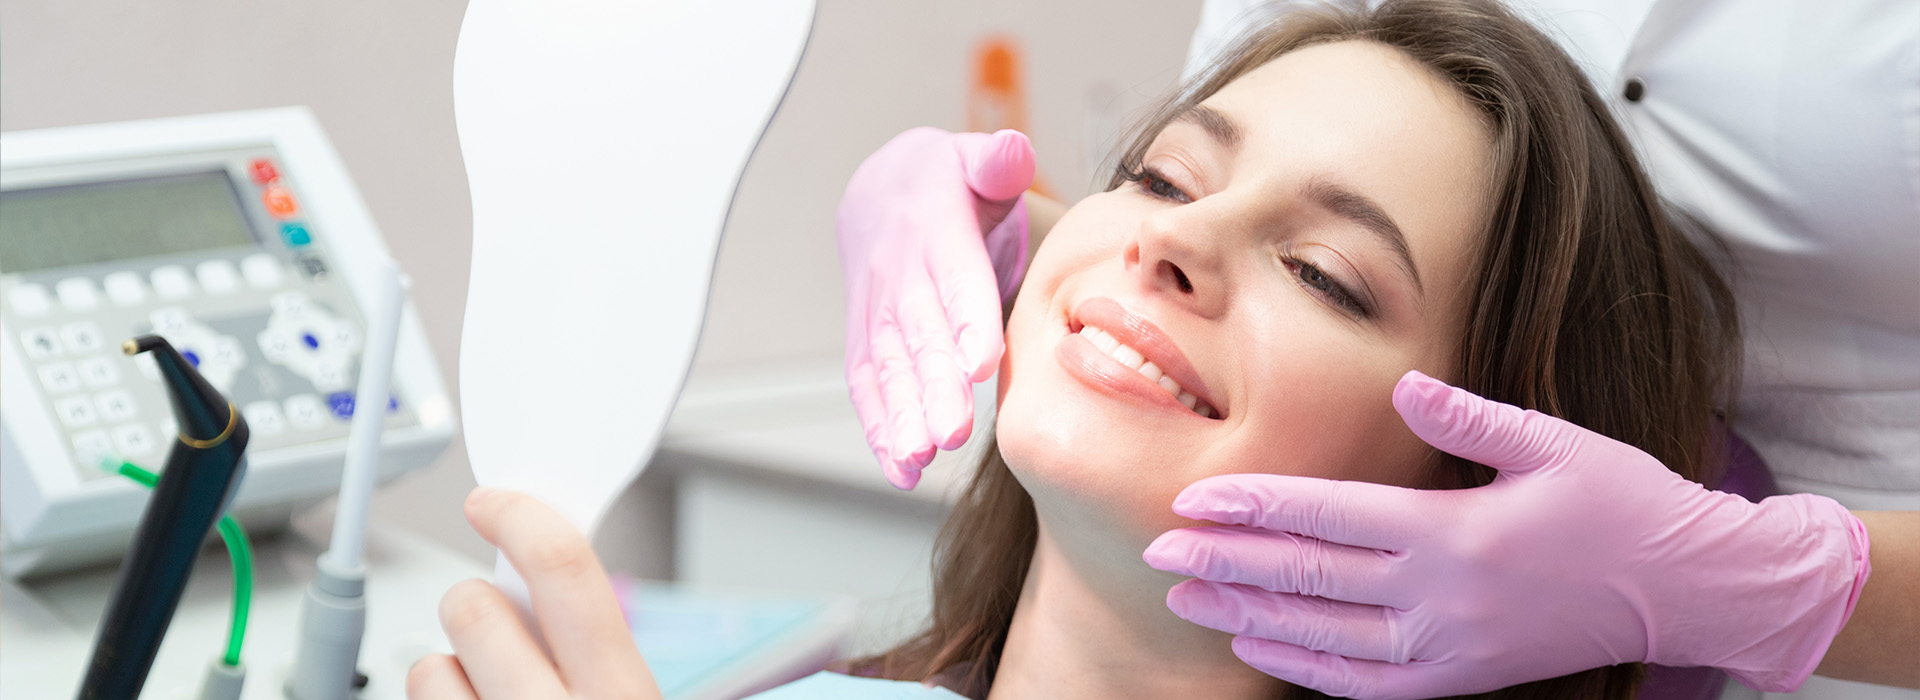 Central Park Dental Aesthetics | After Care, Osseous Surgery and Dental Sealants